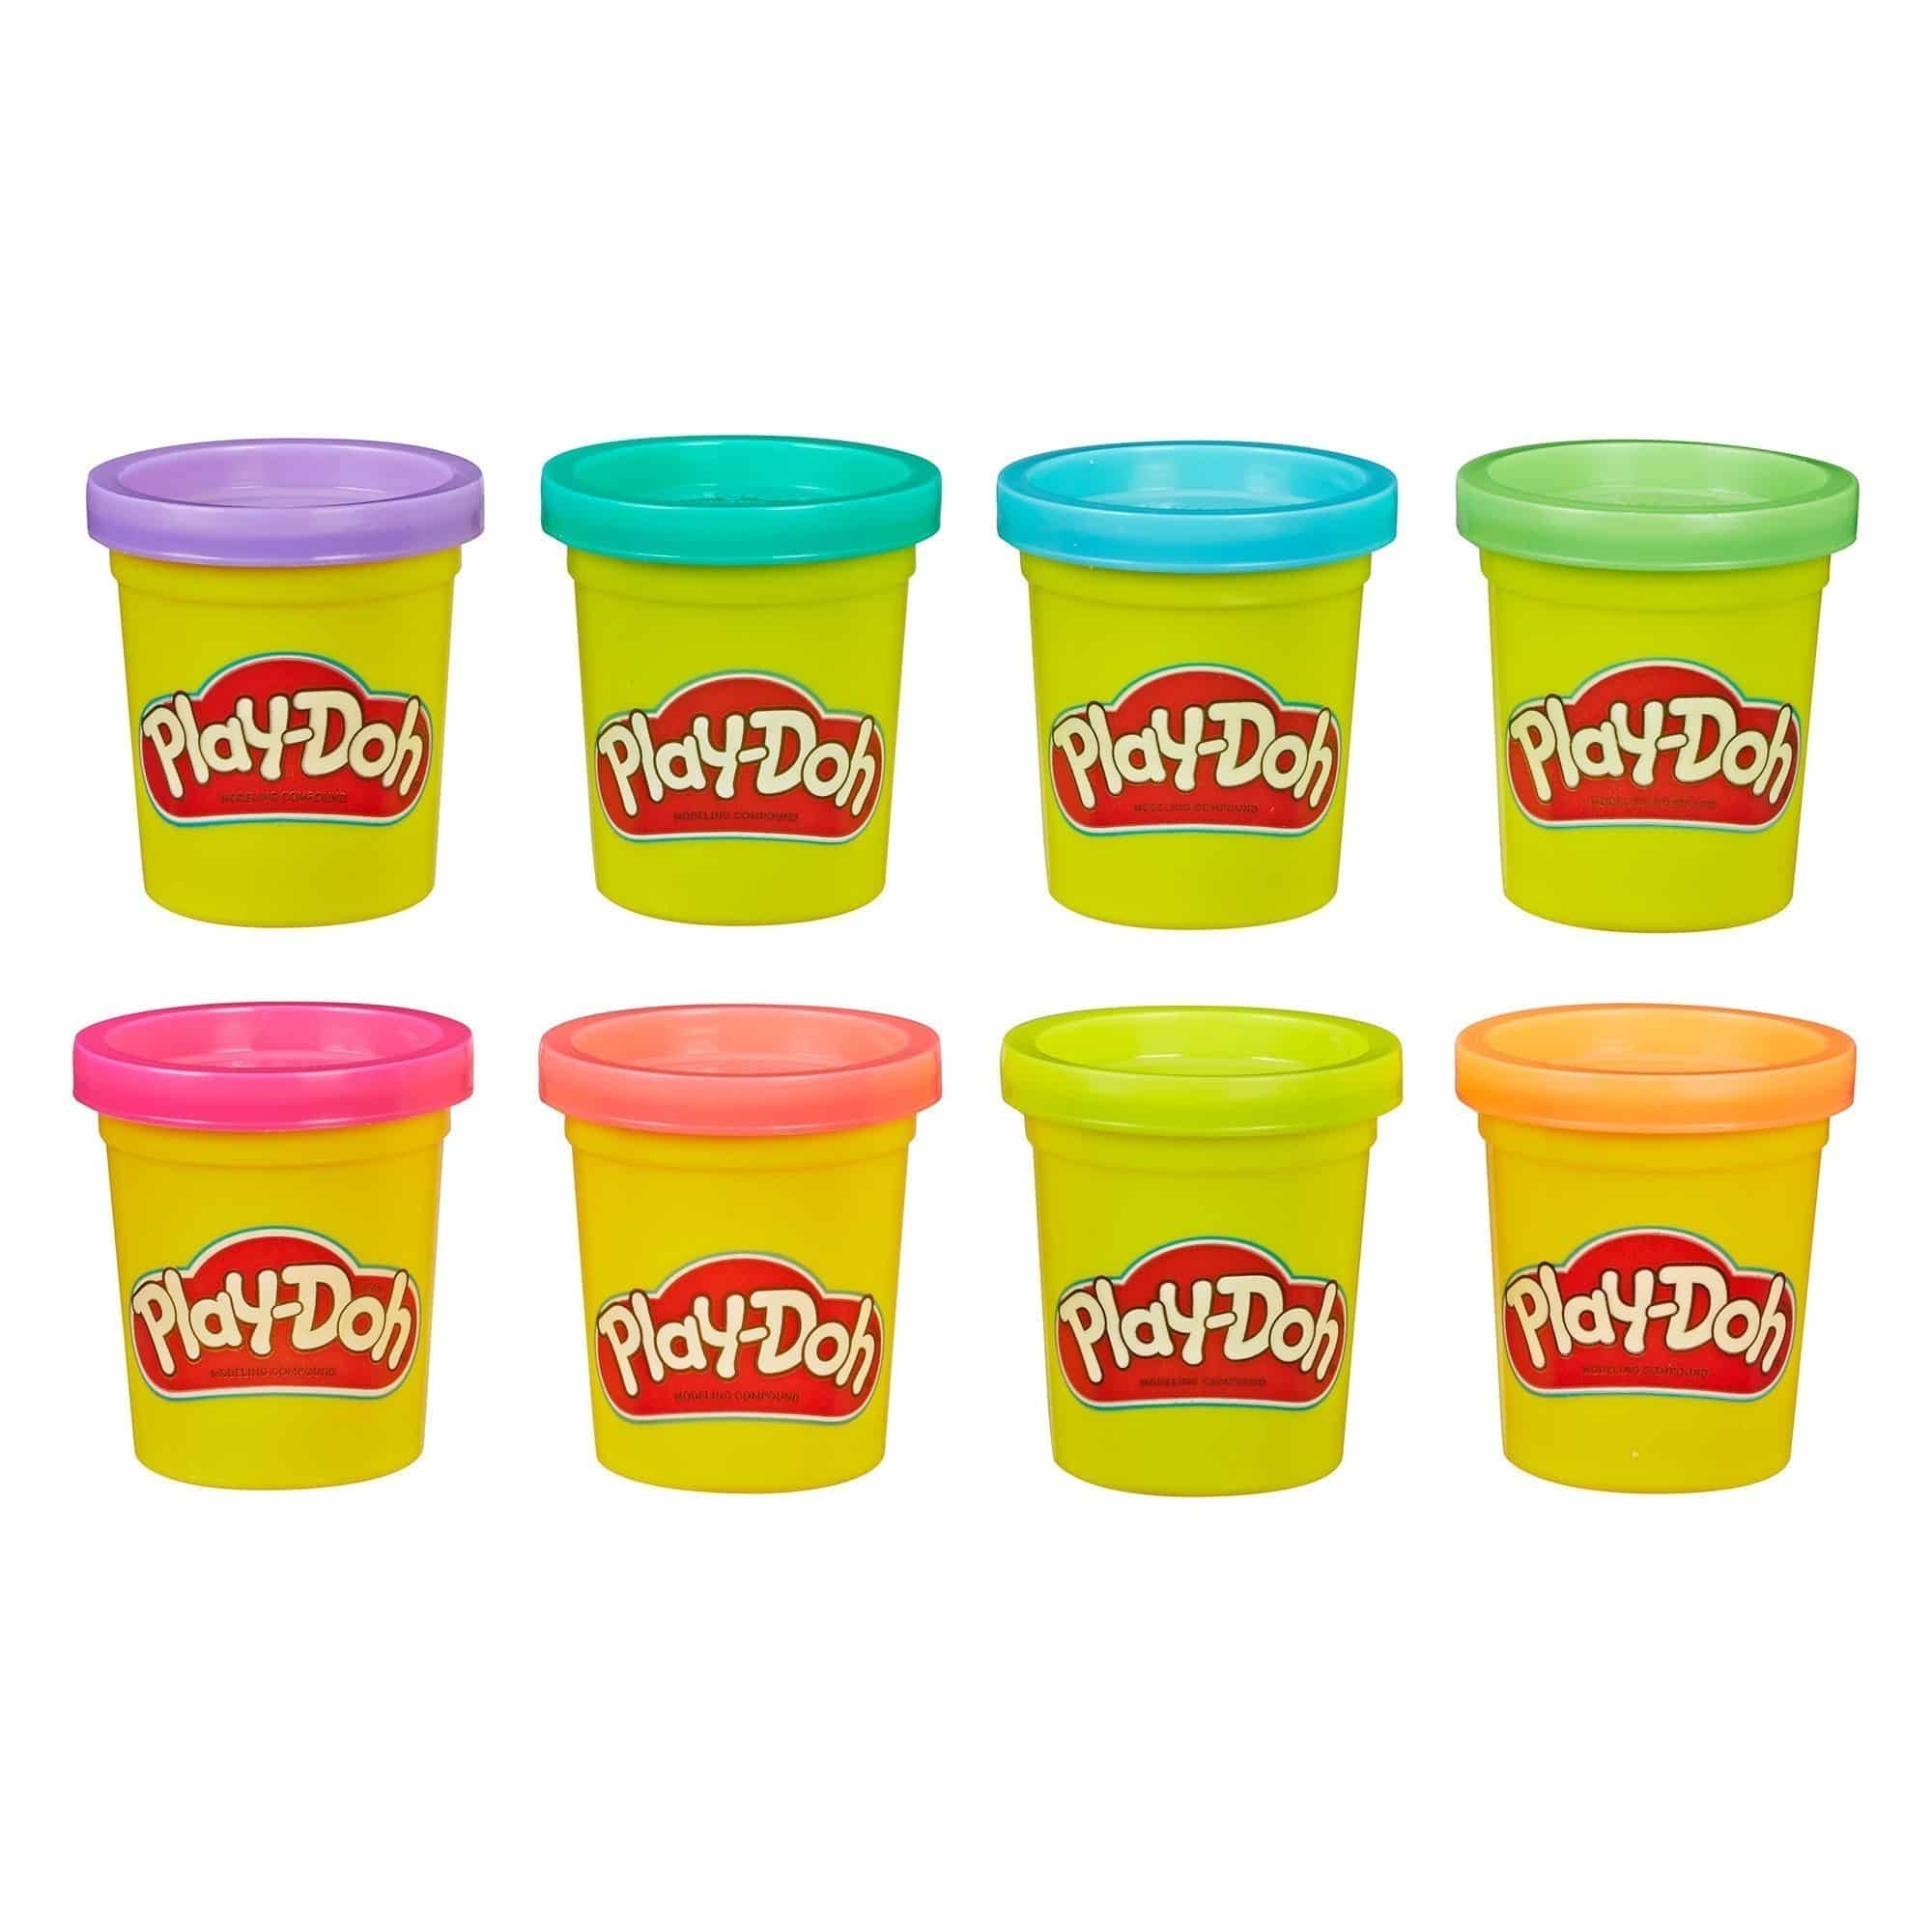 Play-Doh - Neon 8 Pack